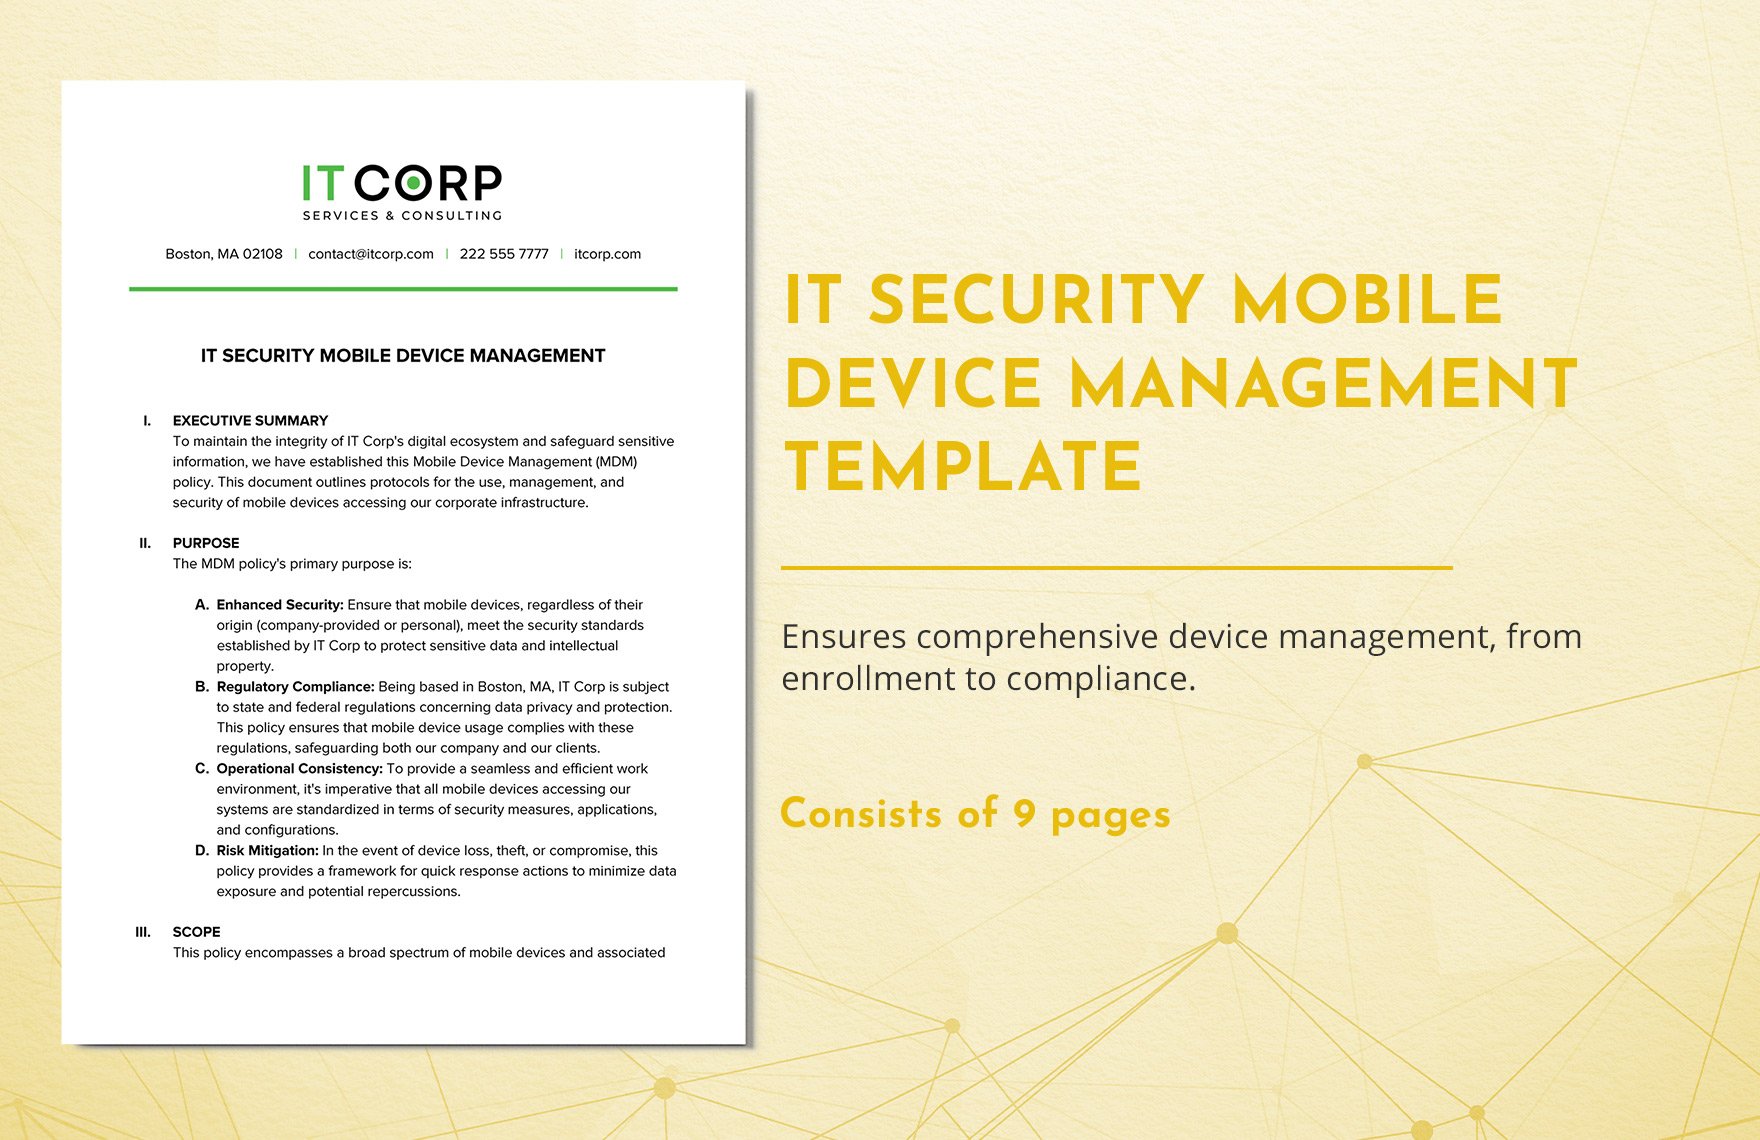 IT Security Mobile Device Management Template